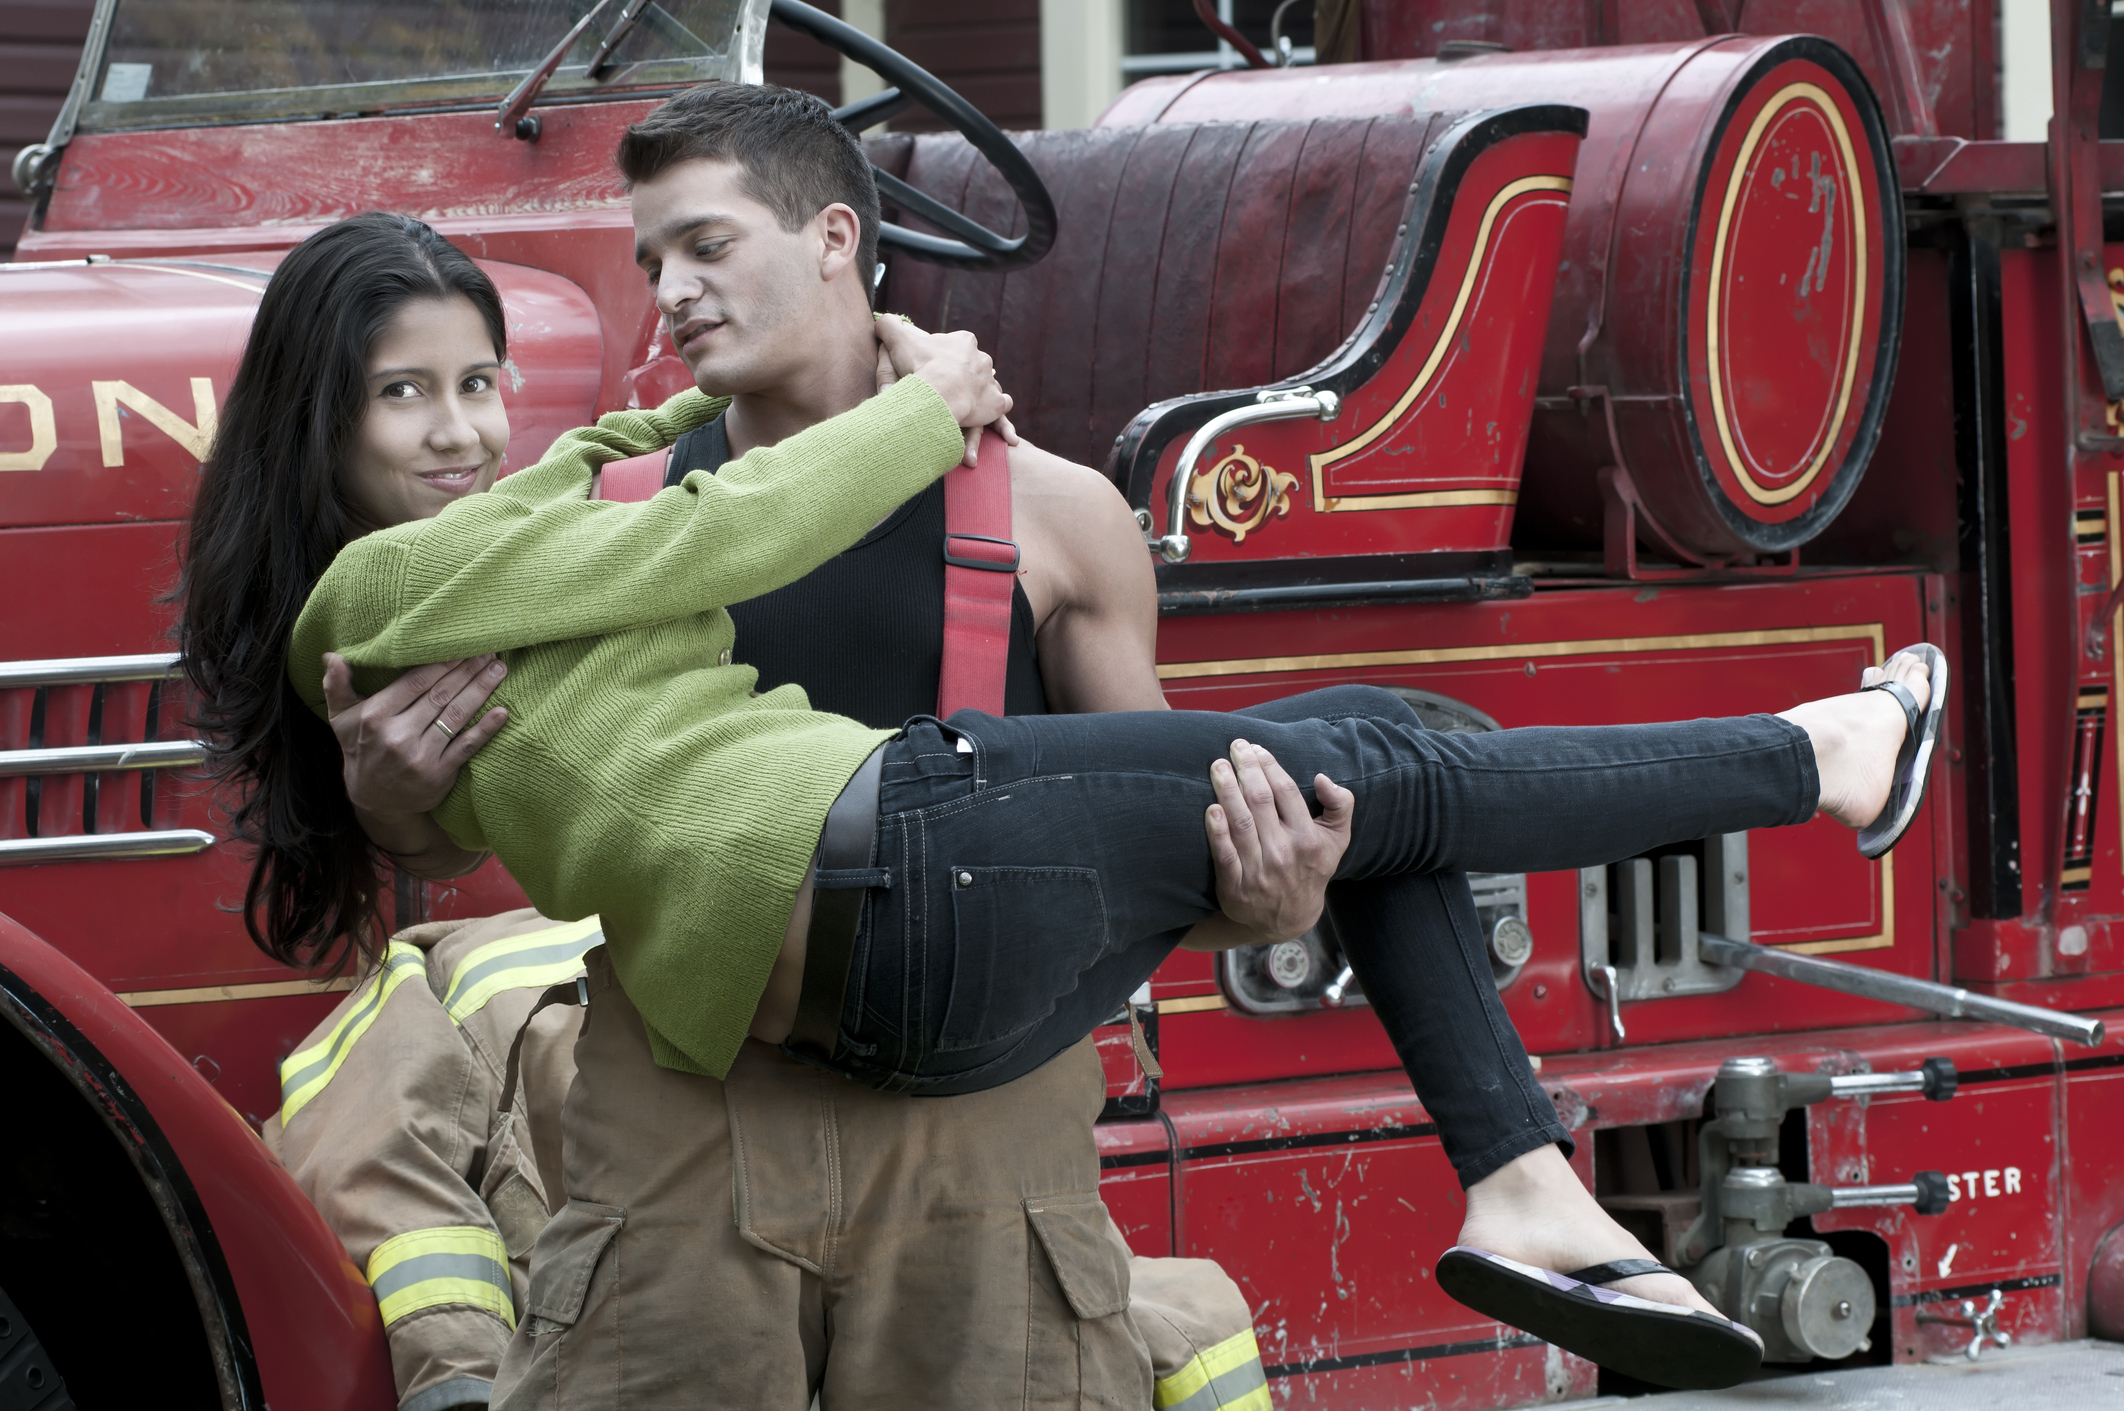 Man in a fireman uniform playfully carries a smiling woman wearing a green sweater and jeans in front of a vintage fire truck